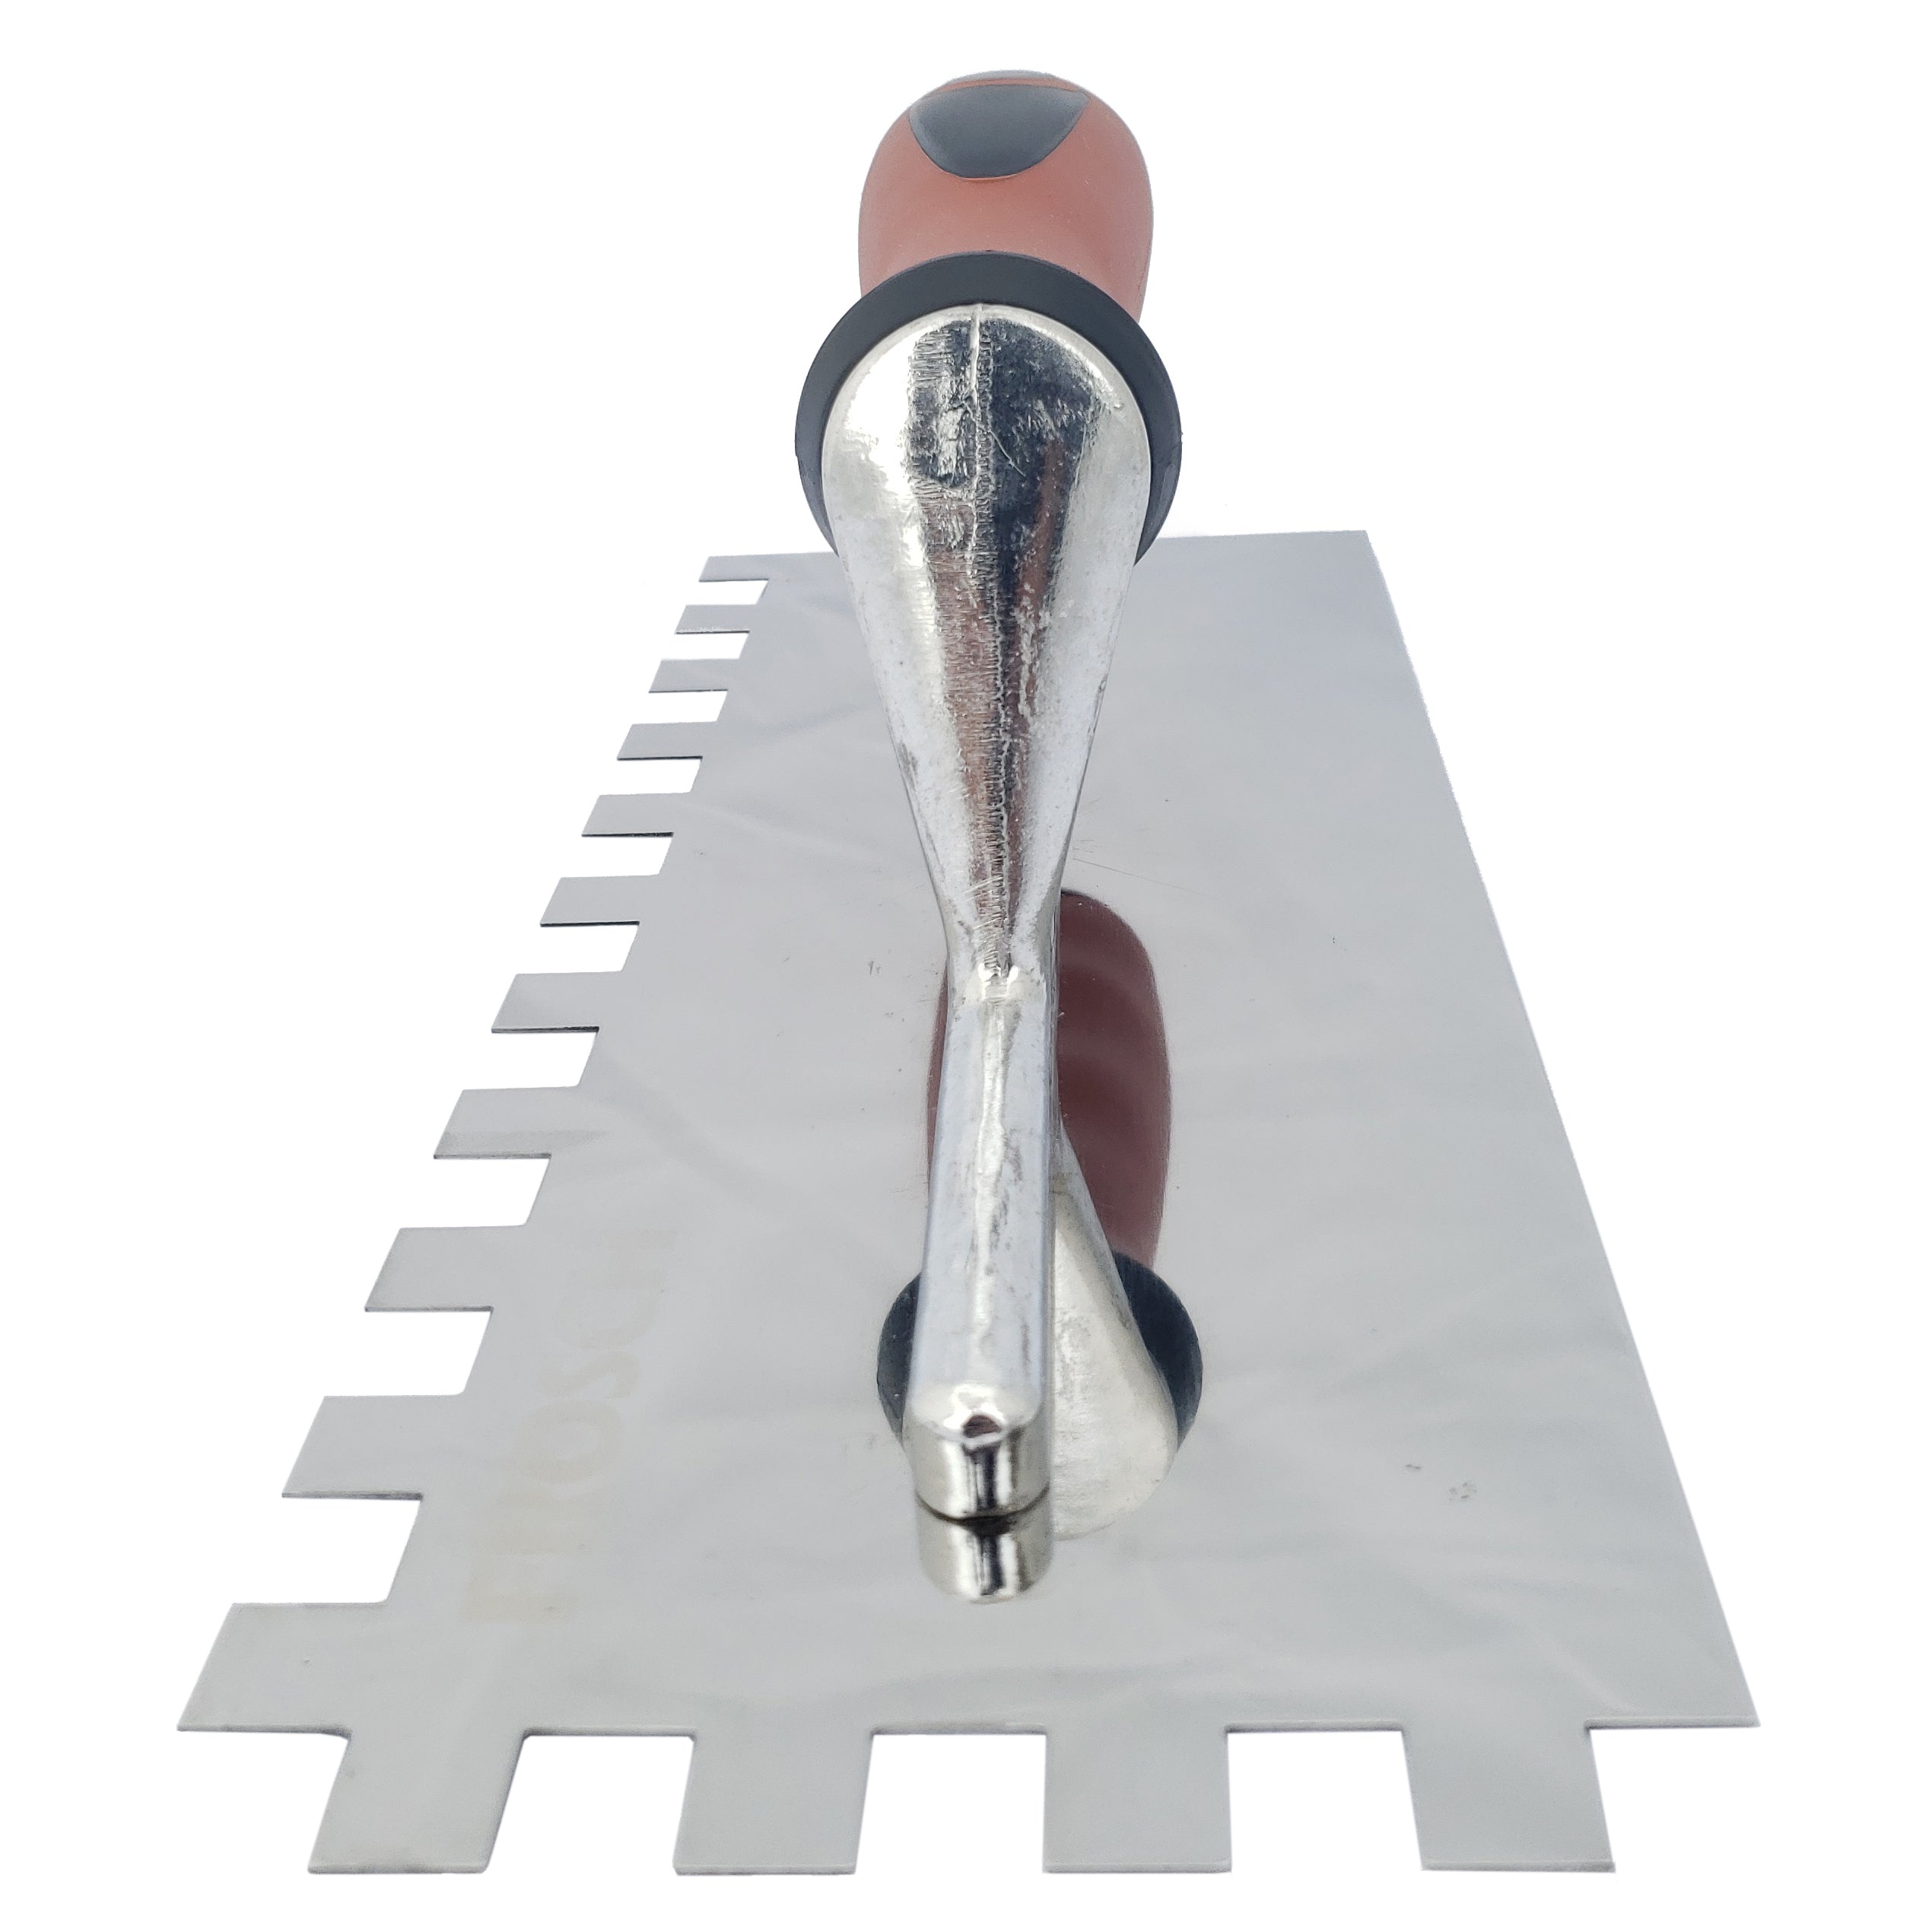 Stainless Steel Square Notch Trowel - 1/2" X 1/2"